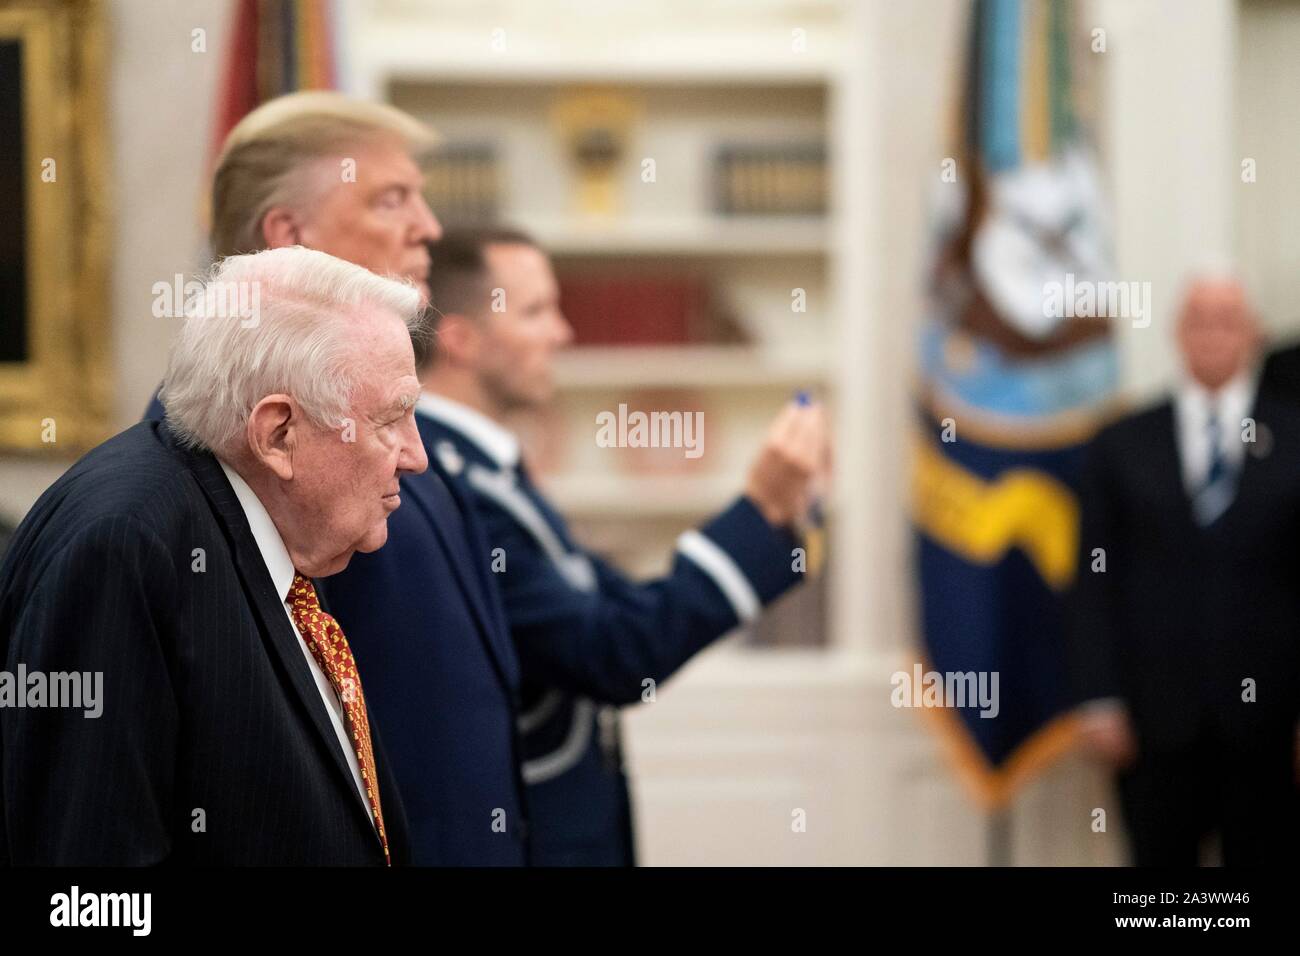 U.S President Donald Trump presents former Attorney General Edwin Meese with the Presidential Medal of Freedom during a ceremony in the Oval Office of the White House October 8, 2019 in Washington, DC. Stock Photo